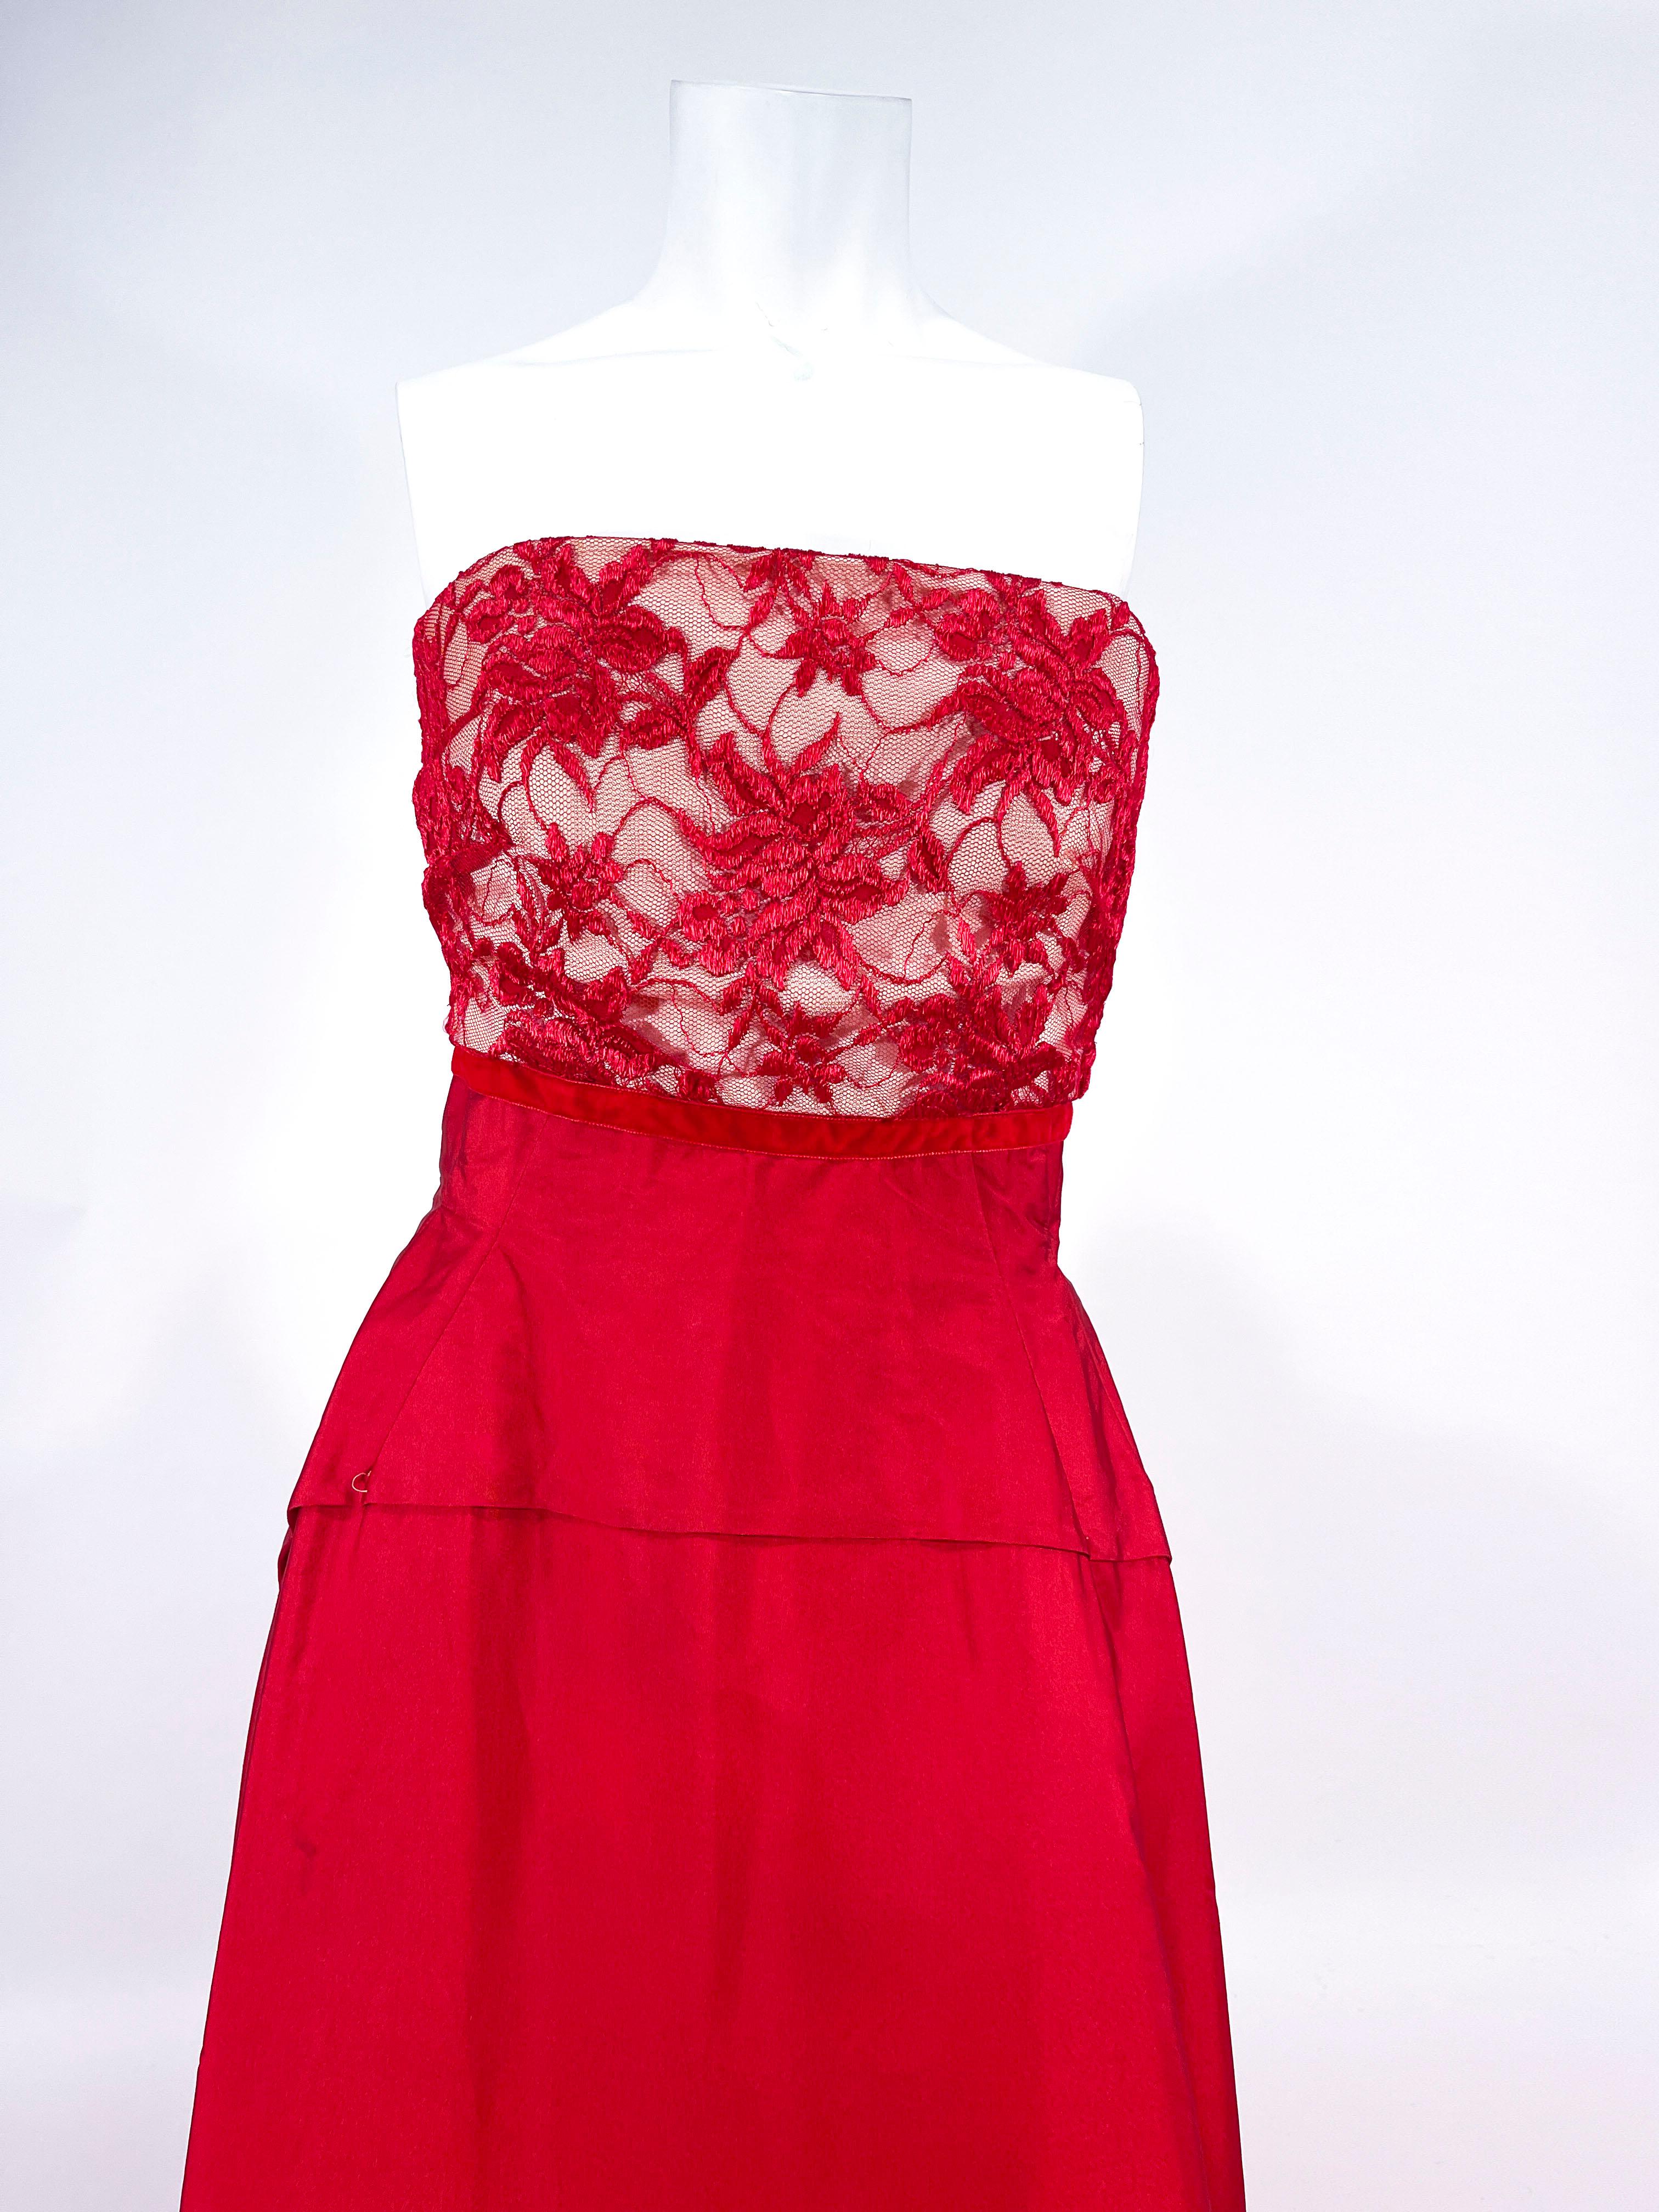 Women's 1960s Helena Barbieri Red Satin and Lace Evening Gown For Sale